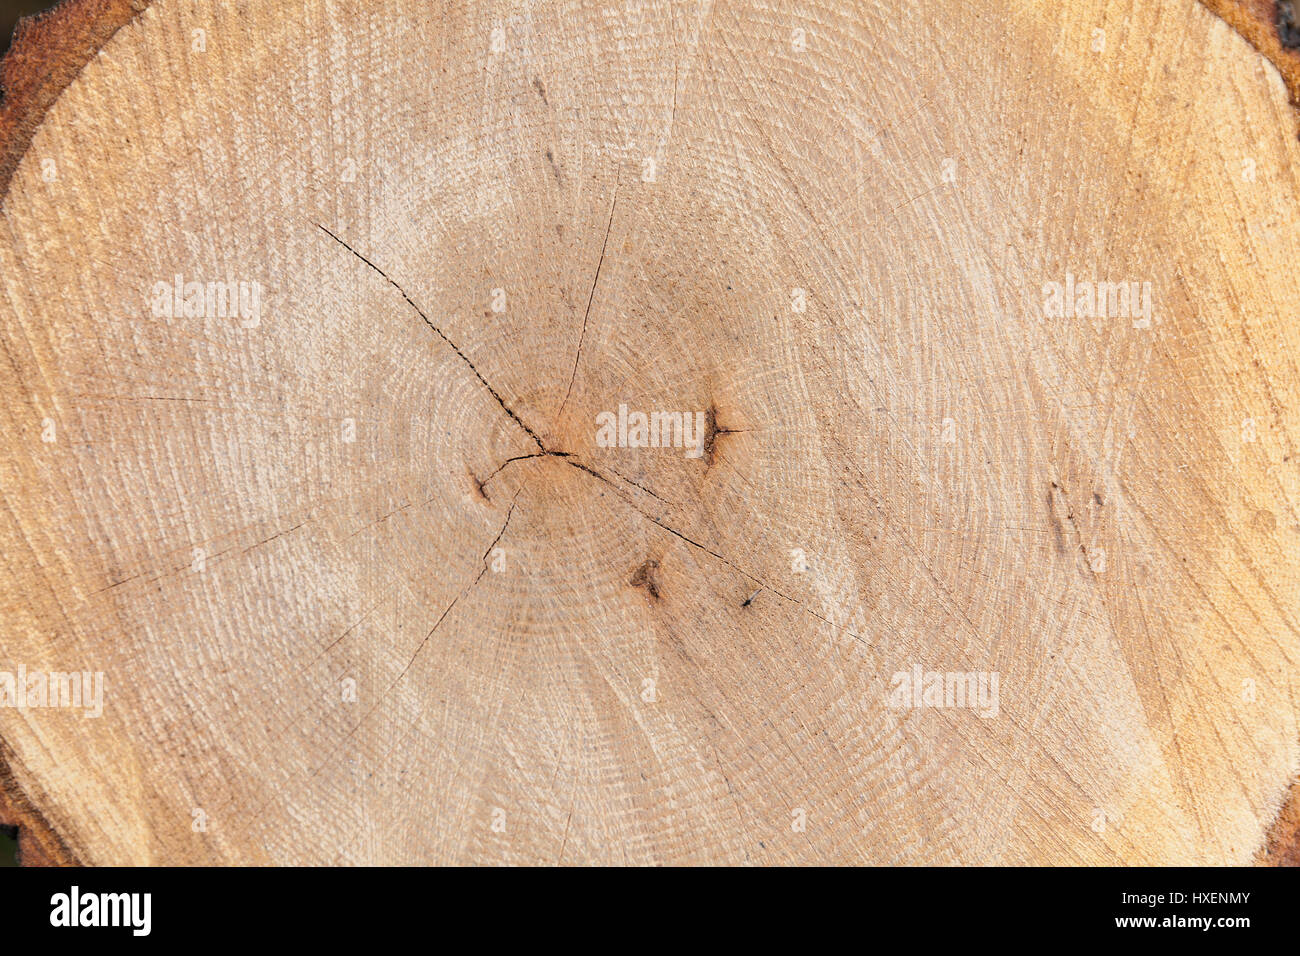 wood cut and piled in a heap Stock Photo